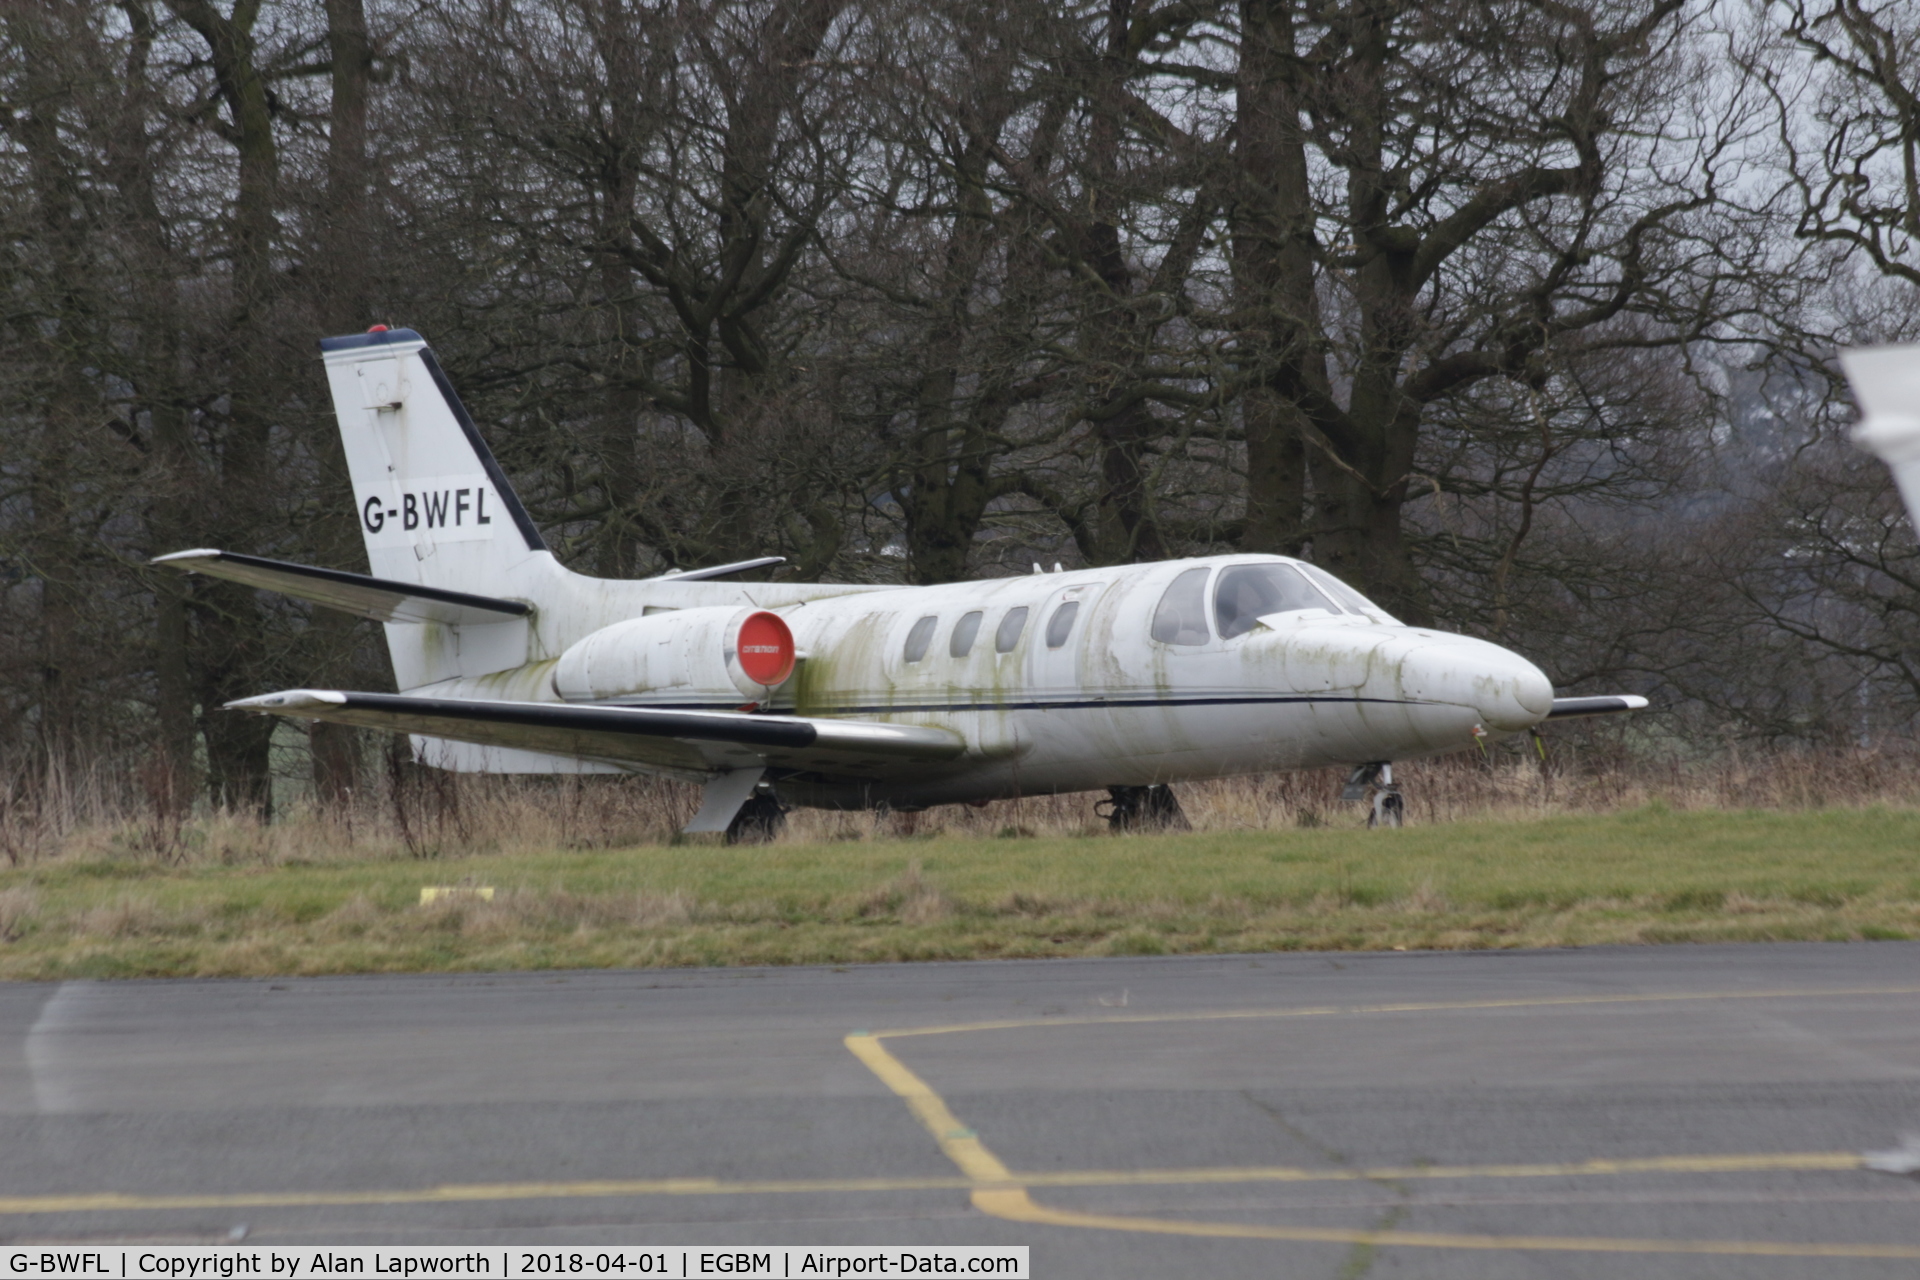 G-BWFL, 1975 Cessna 500 Citation C/N 500-0264, Looking a bit worse for wear